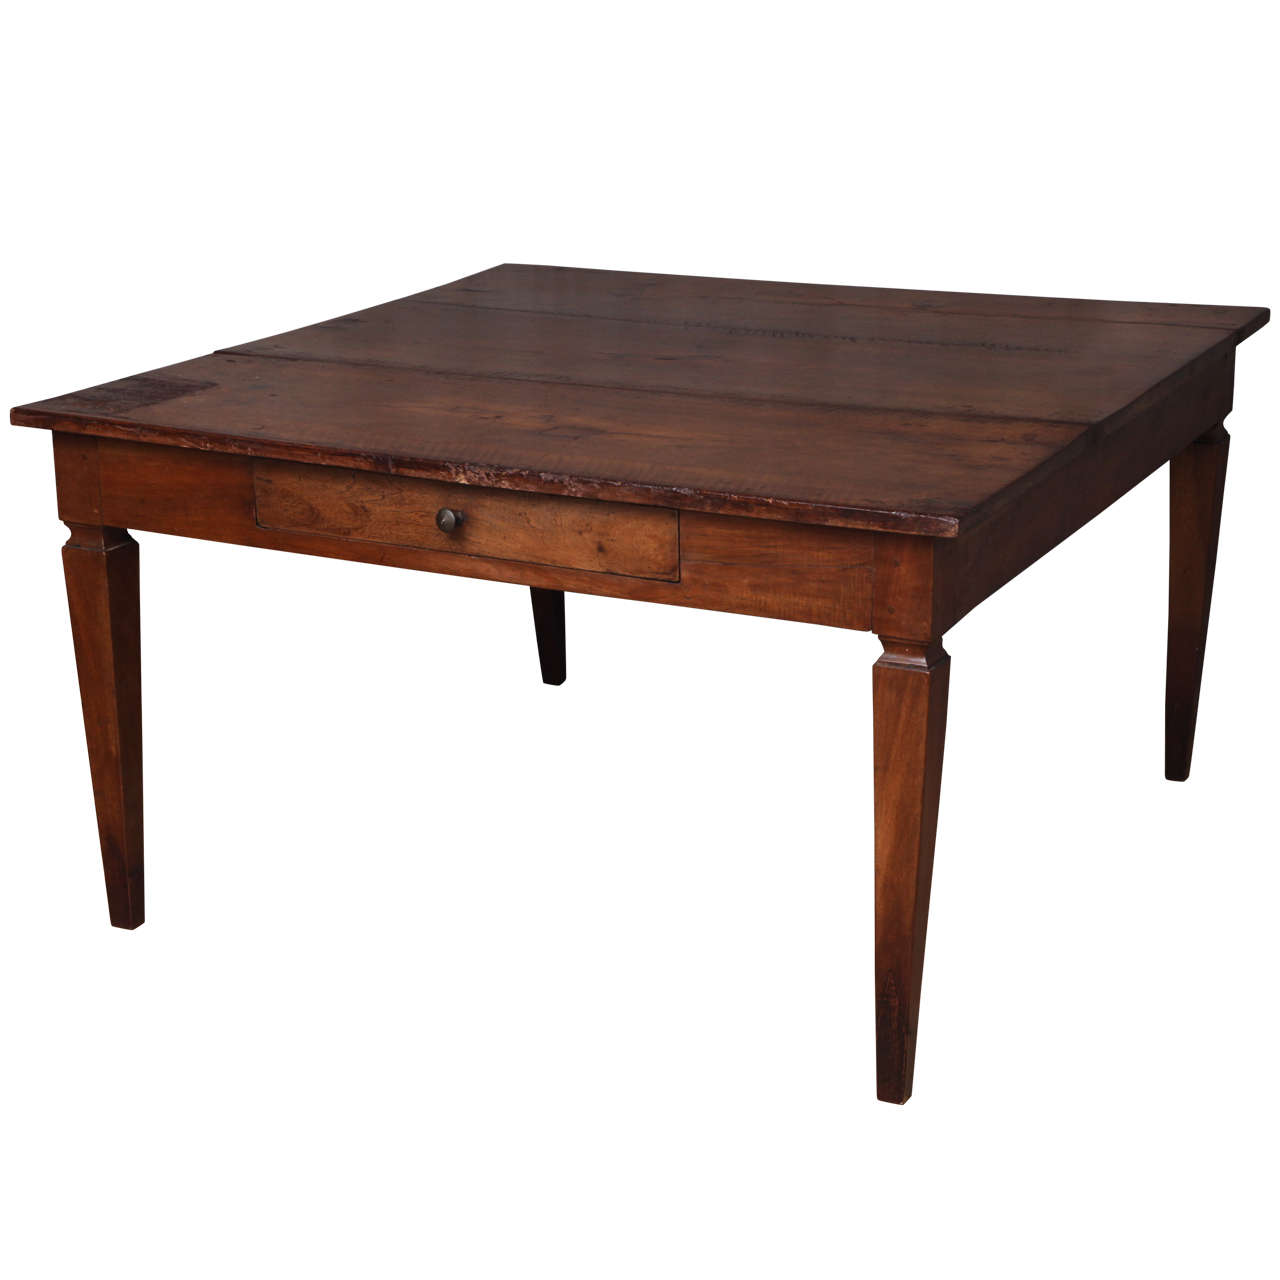 Italian Walnut Dining Table with Drawers, Late 18th Century For Sale